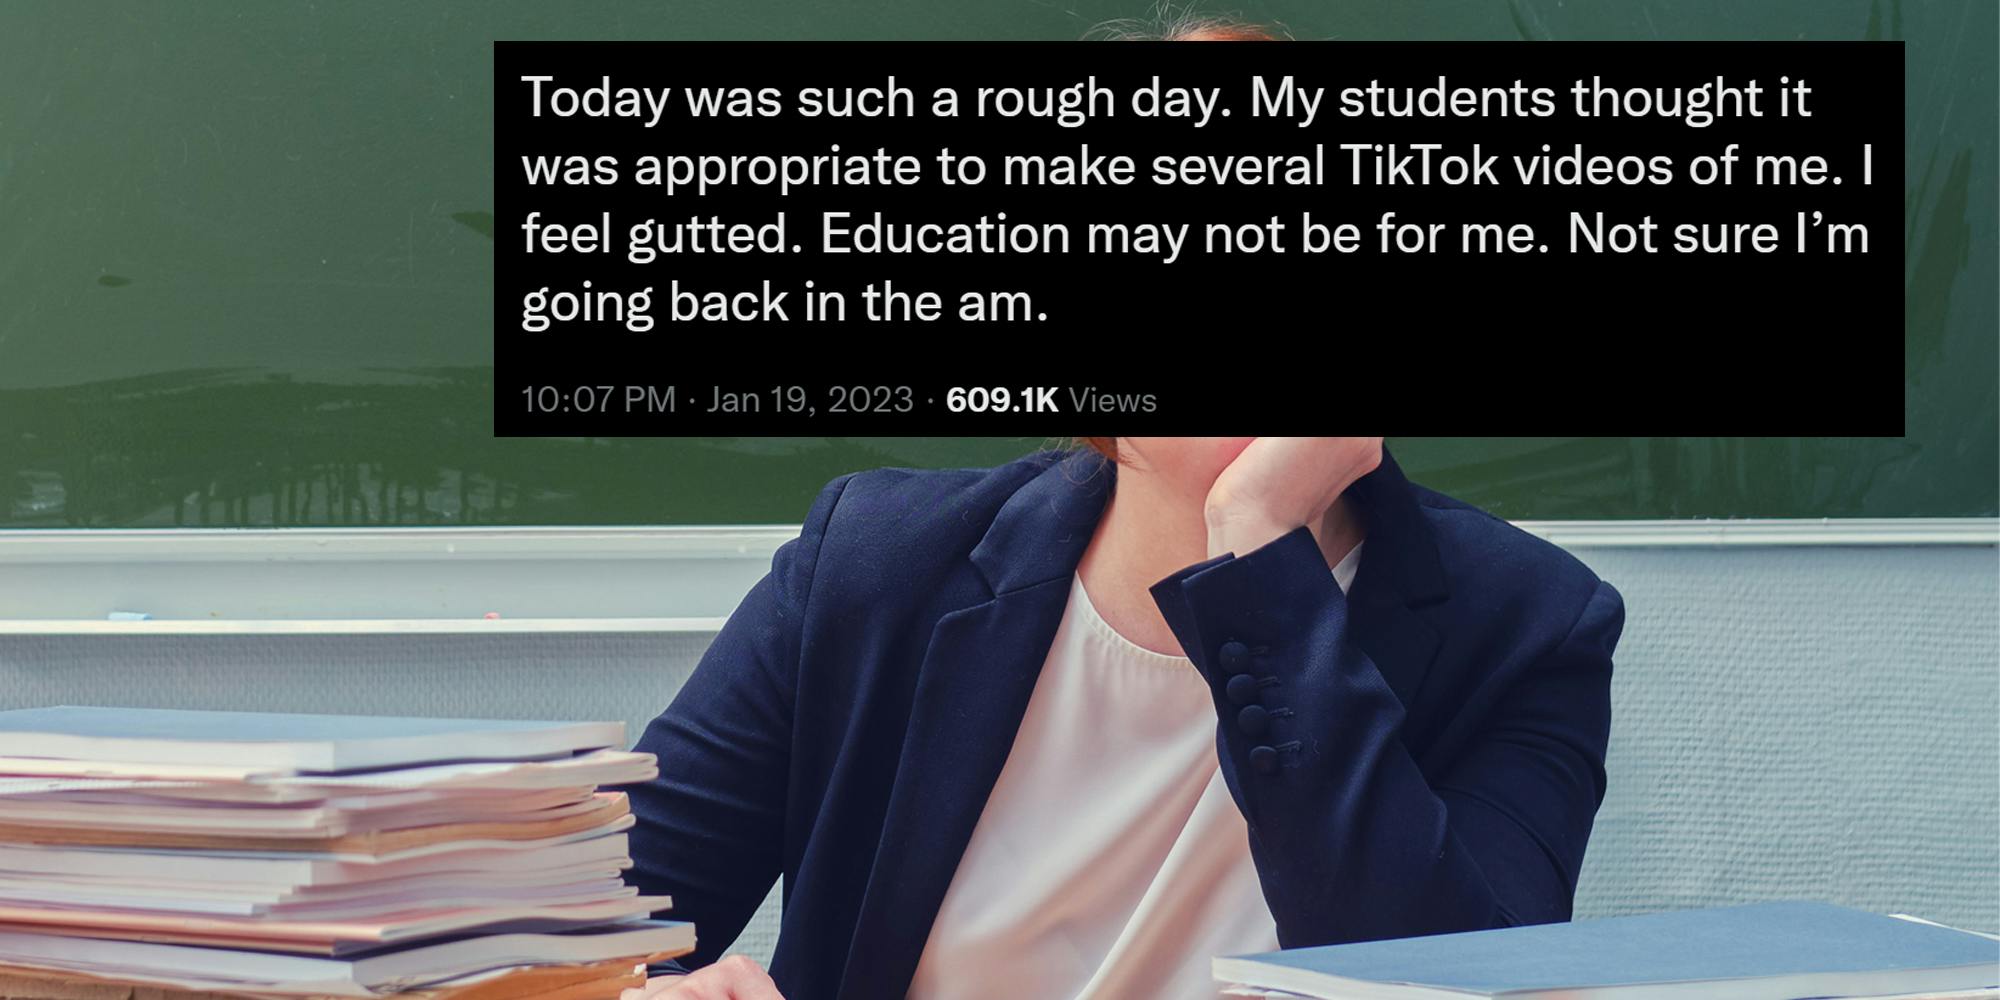 teacher with tweet "Today was such a rough day. My students thought it was appropriate to make several TikTok videos of me. I feel gutted. Education may not be for me. Not sure I'm going back in the am."